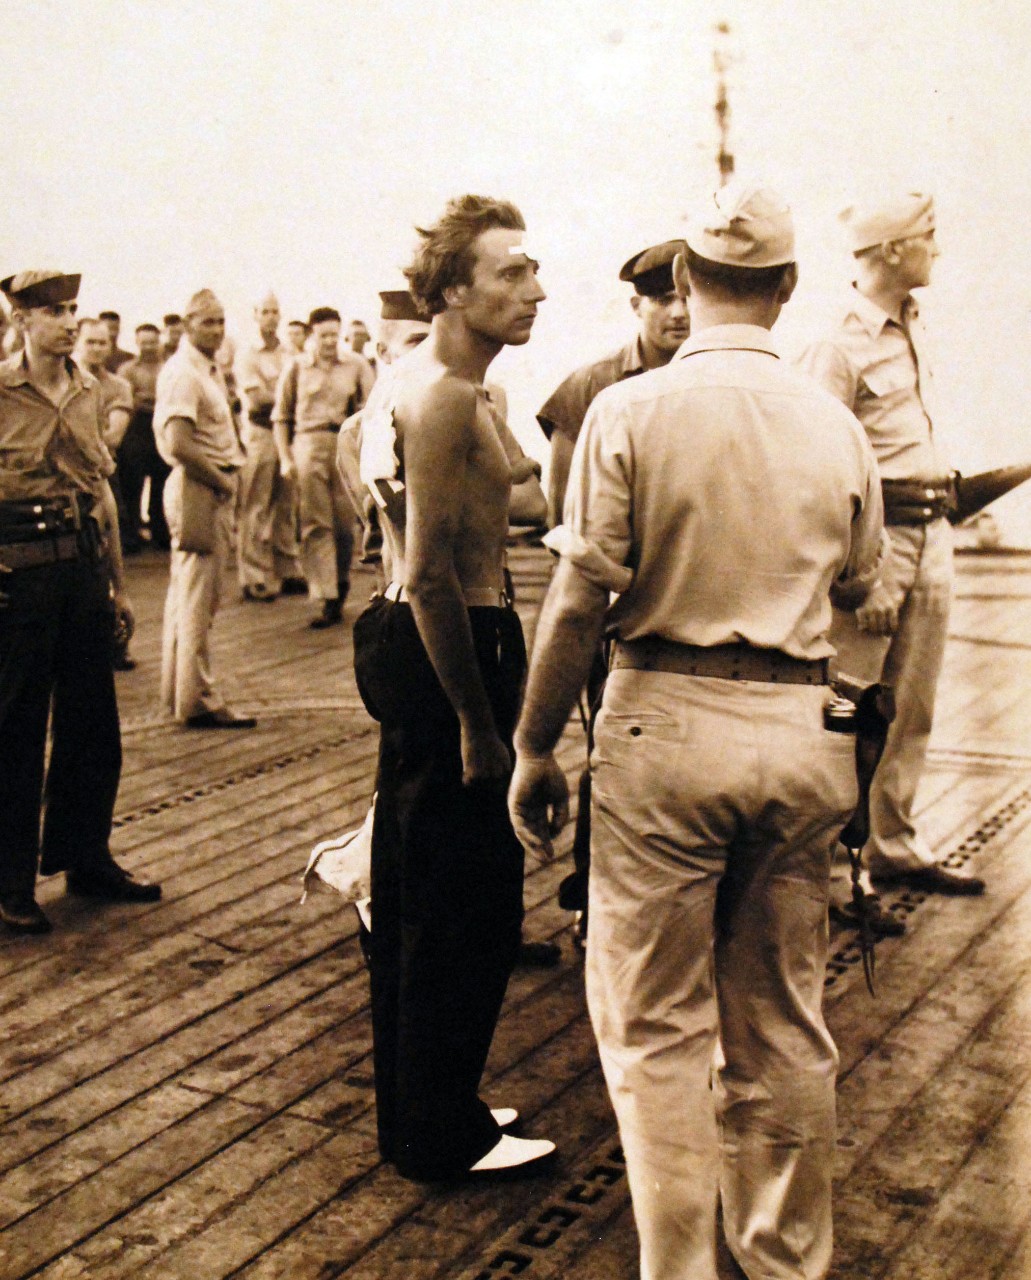 80-G-77199: Air attacks on German U-boats, WWII. The German captain of U-185 and U-604 survivors onboard USS Core (CVE-13), August 24, 1943. They are being directed by the Master-At-Arms. Incident #4082. 